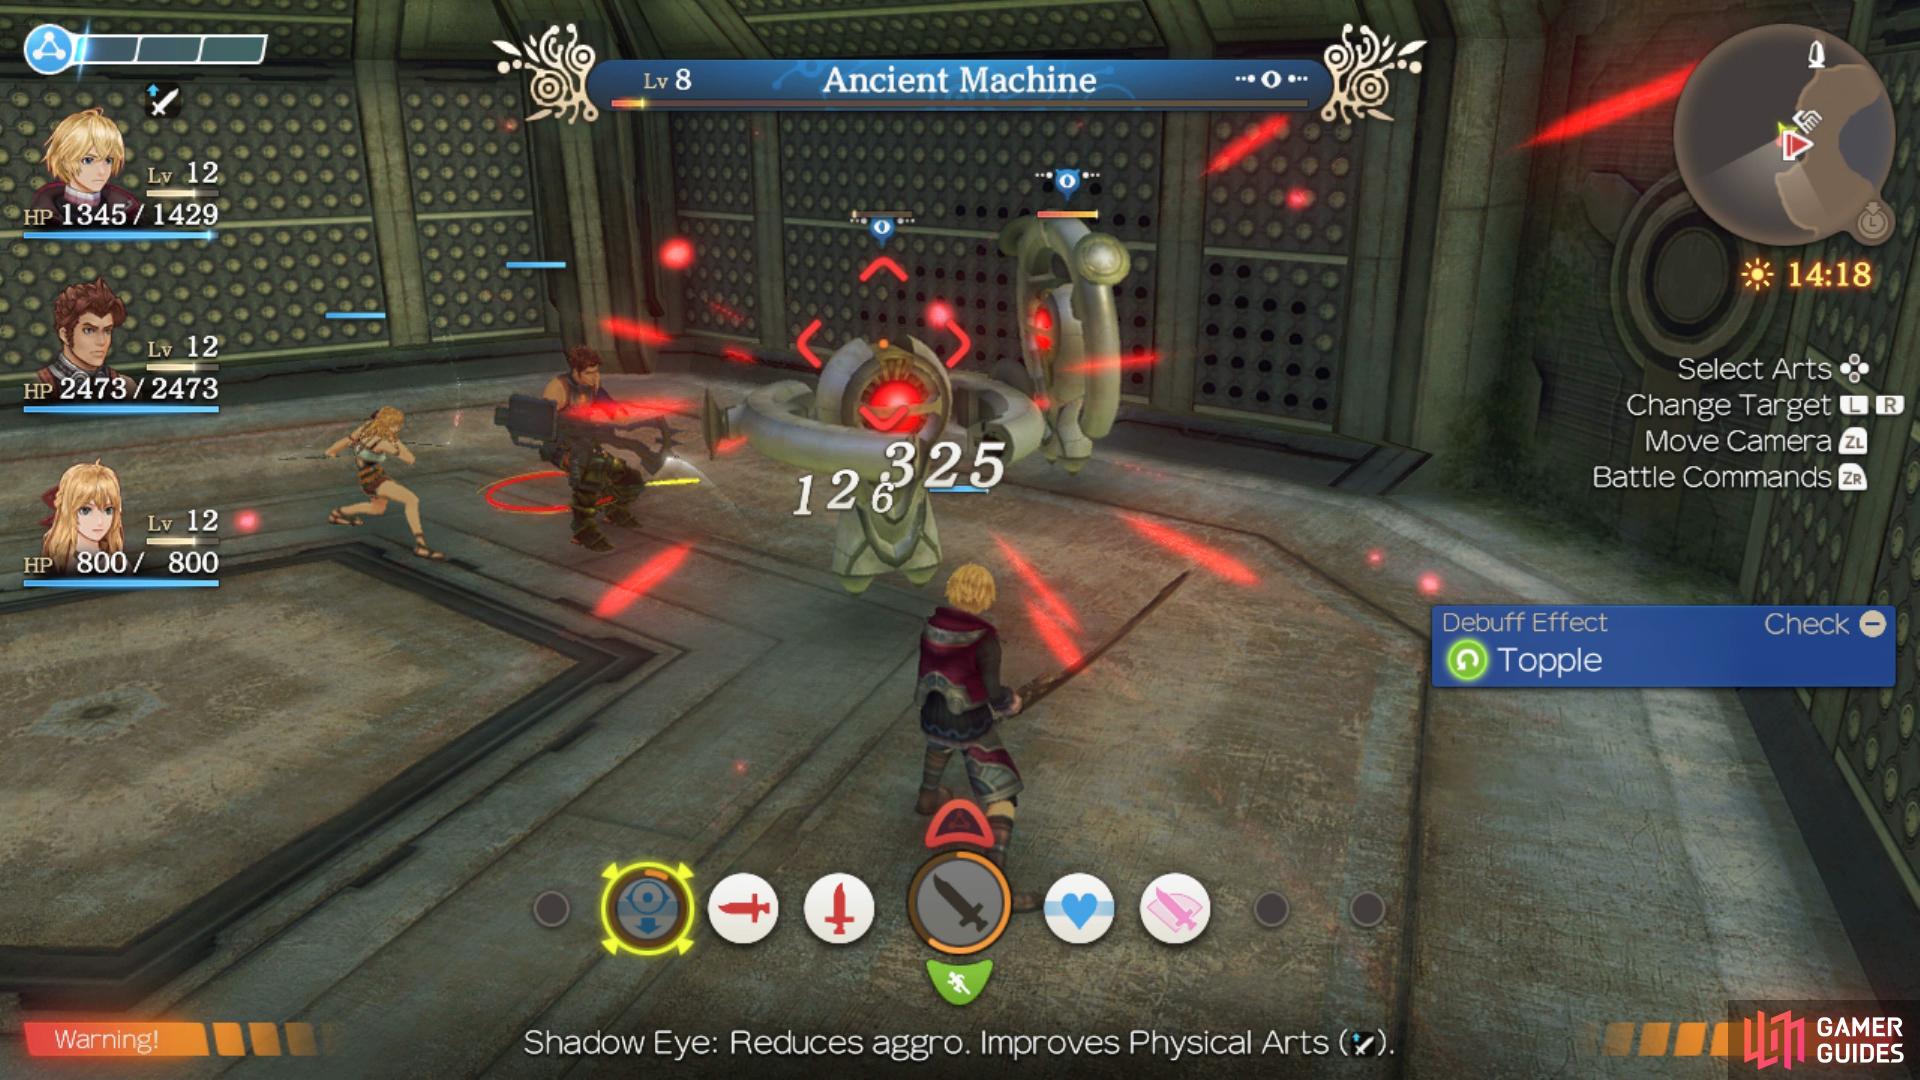 Focus your attacks on one at a time to take each one down quicker and not allow them to make use of Guard Mode.